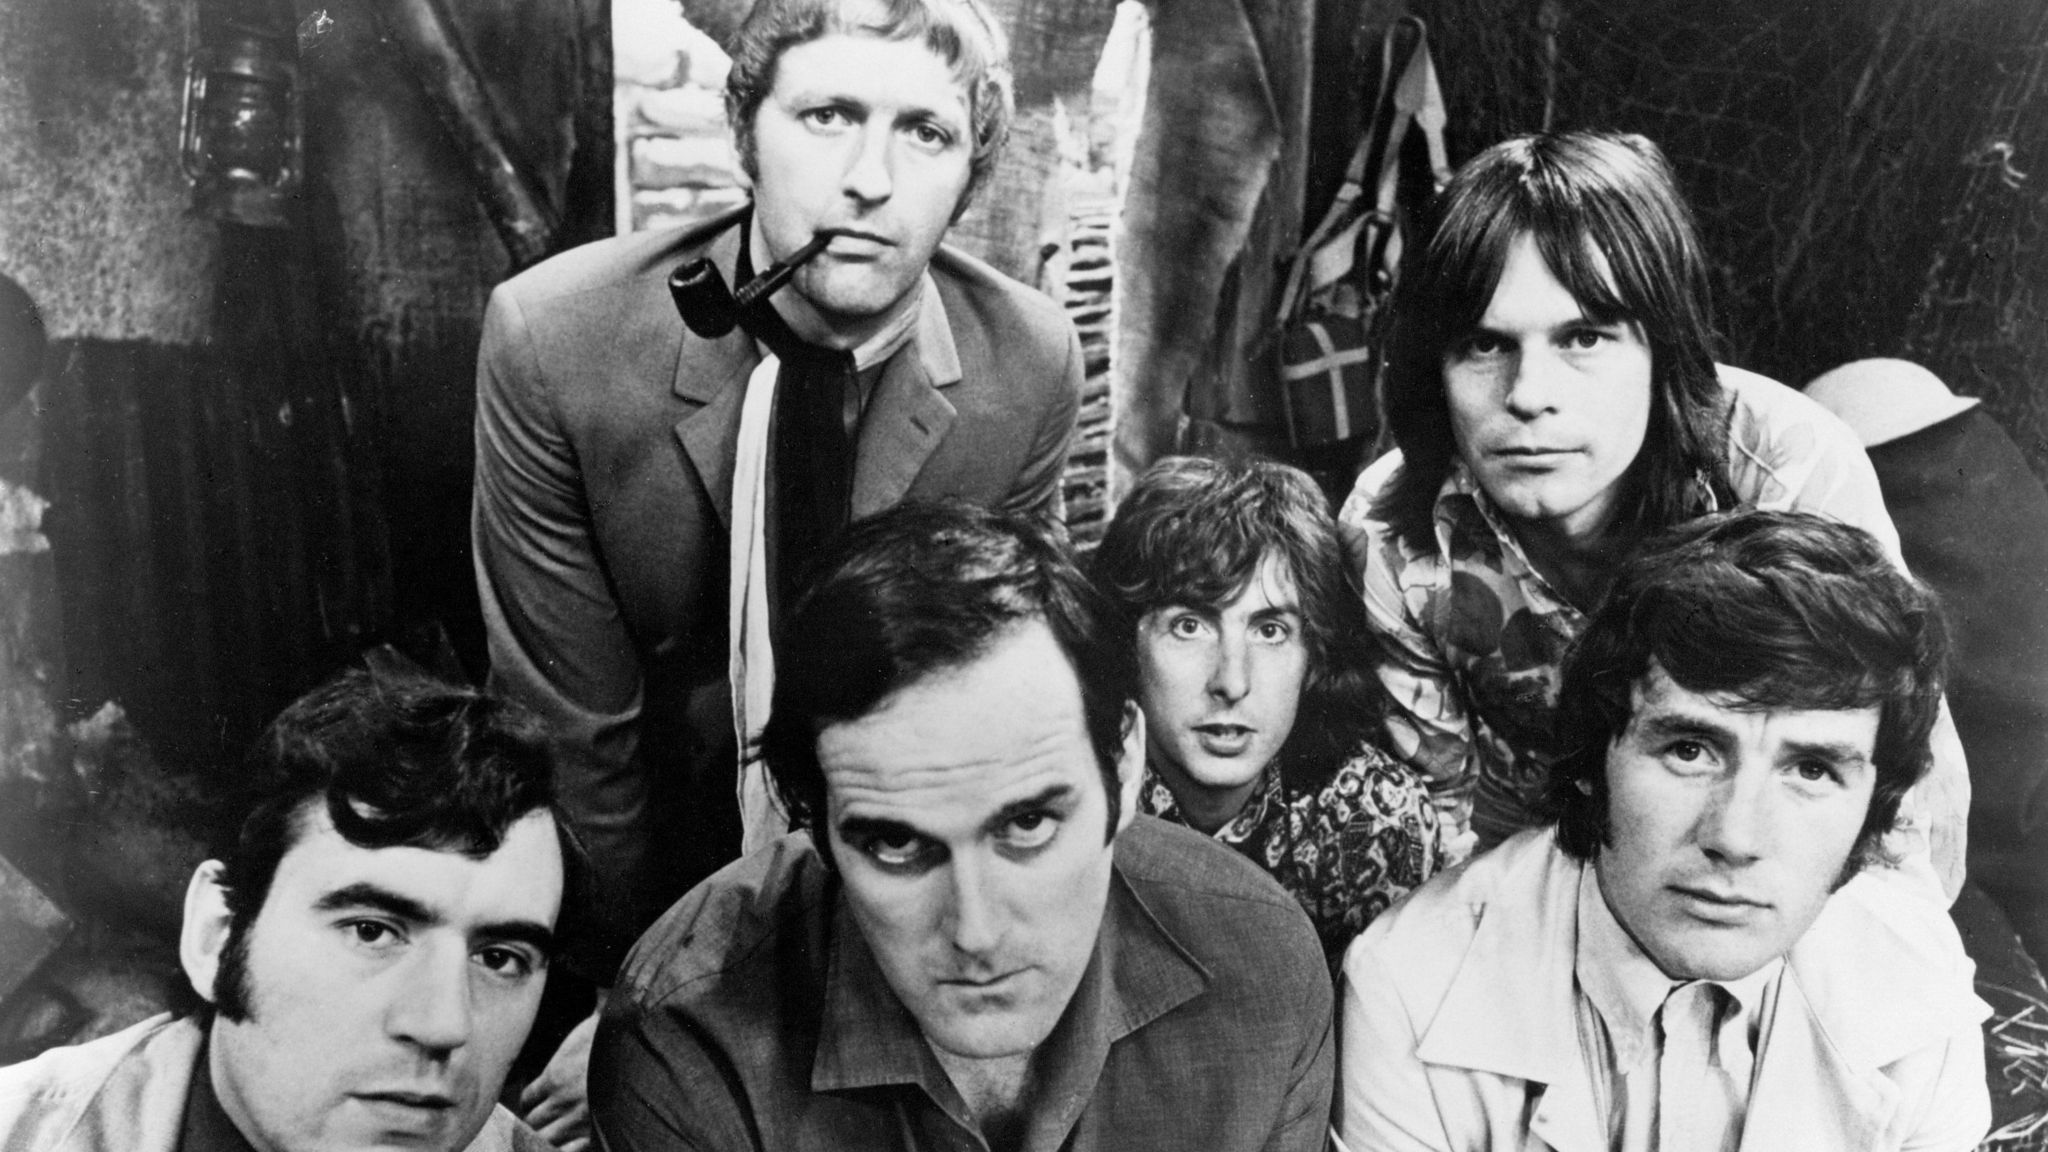 Sir Michael made his name with Monty Python, alongside Terry Jones, Graham Chapman, John Cleese, Eric Idle and Terry Gilliam (L-R)